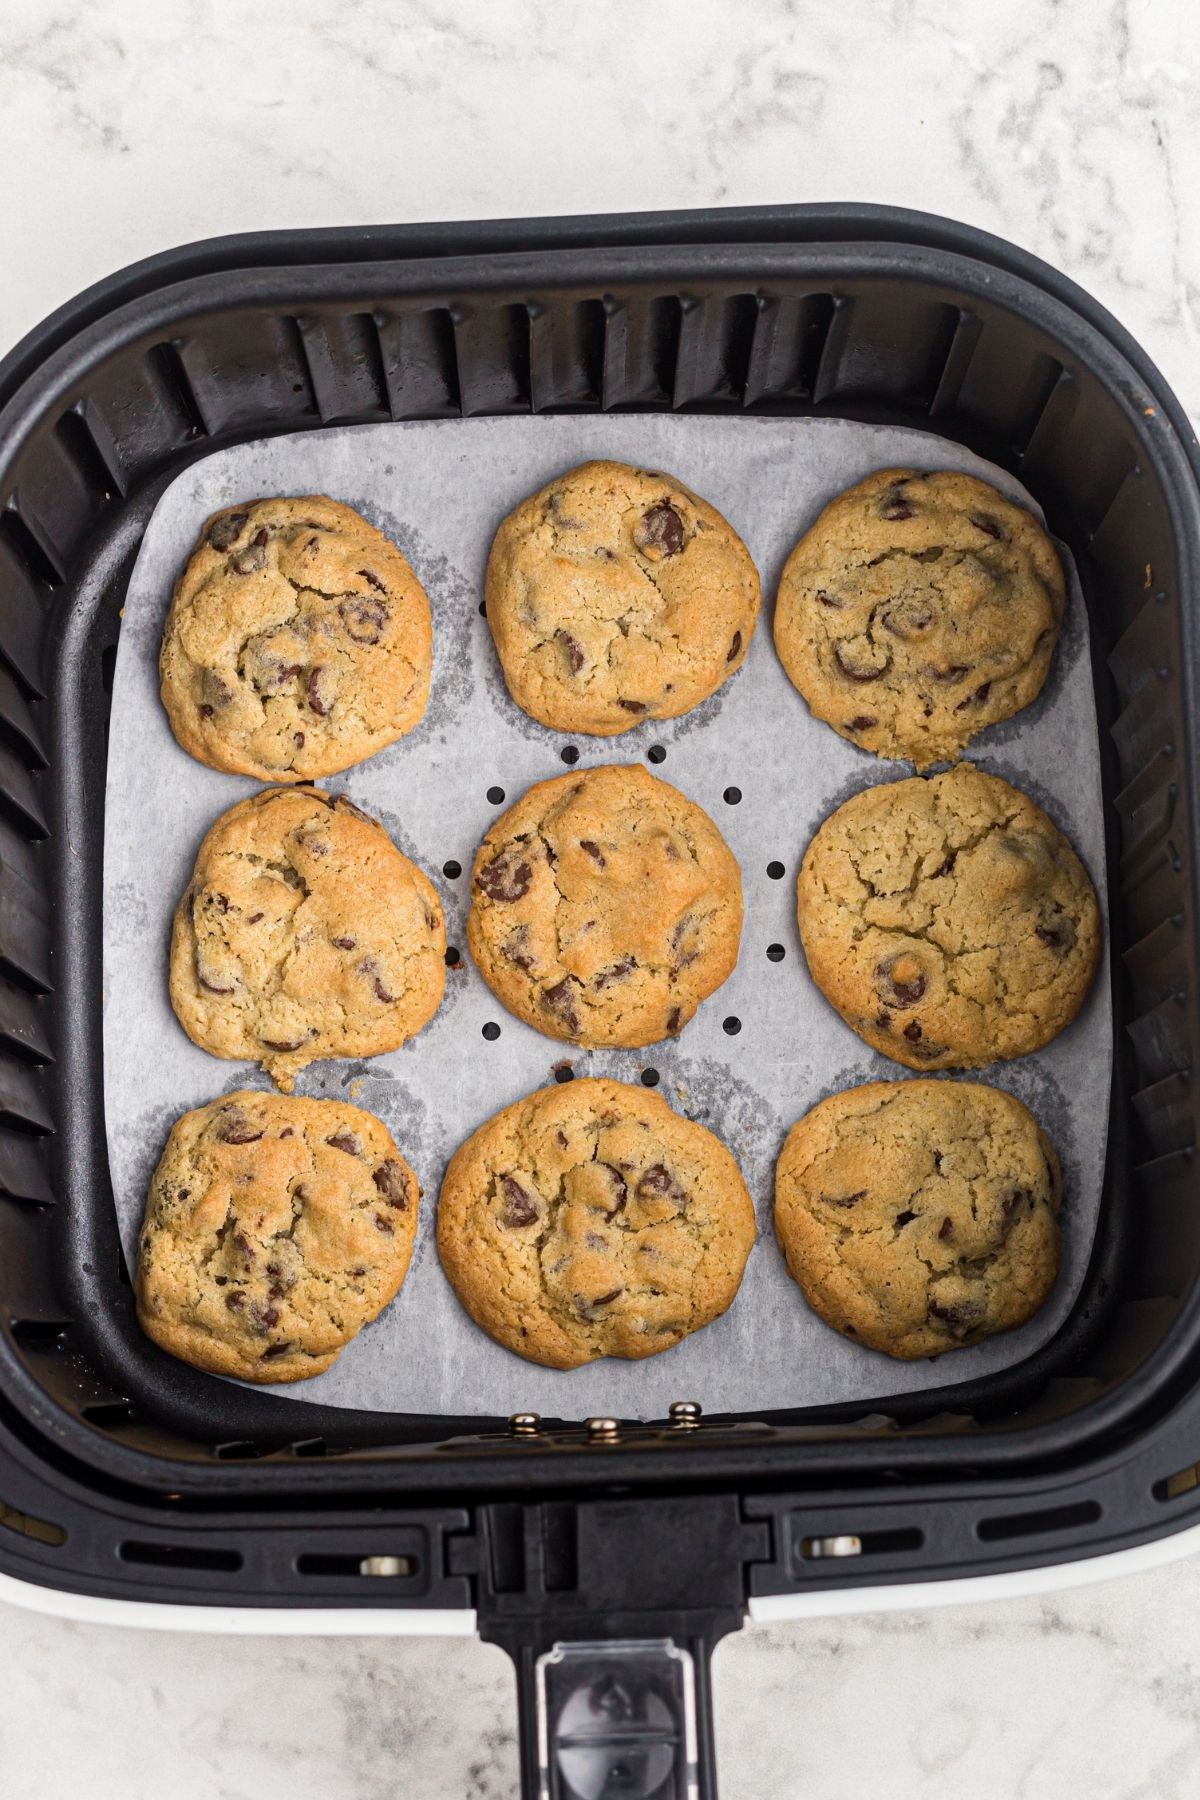 Cookies in the air fryer basket after being cooked